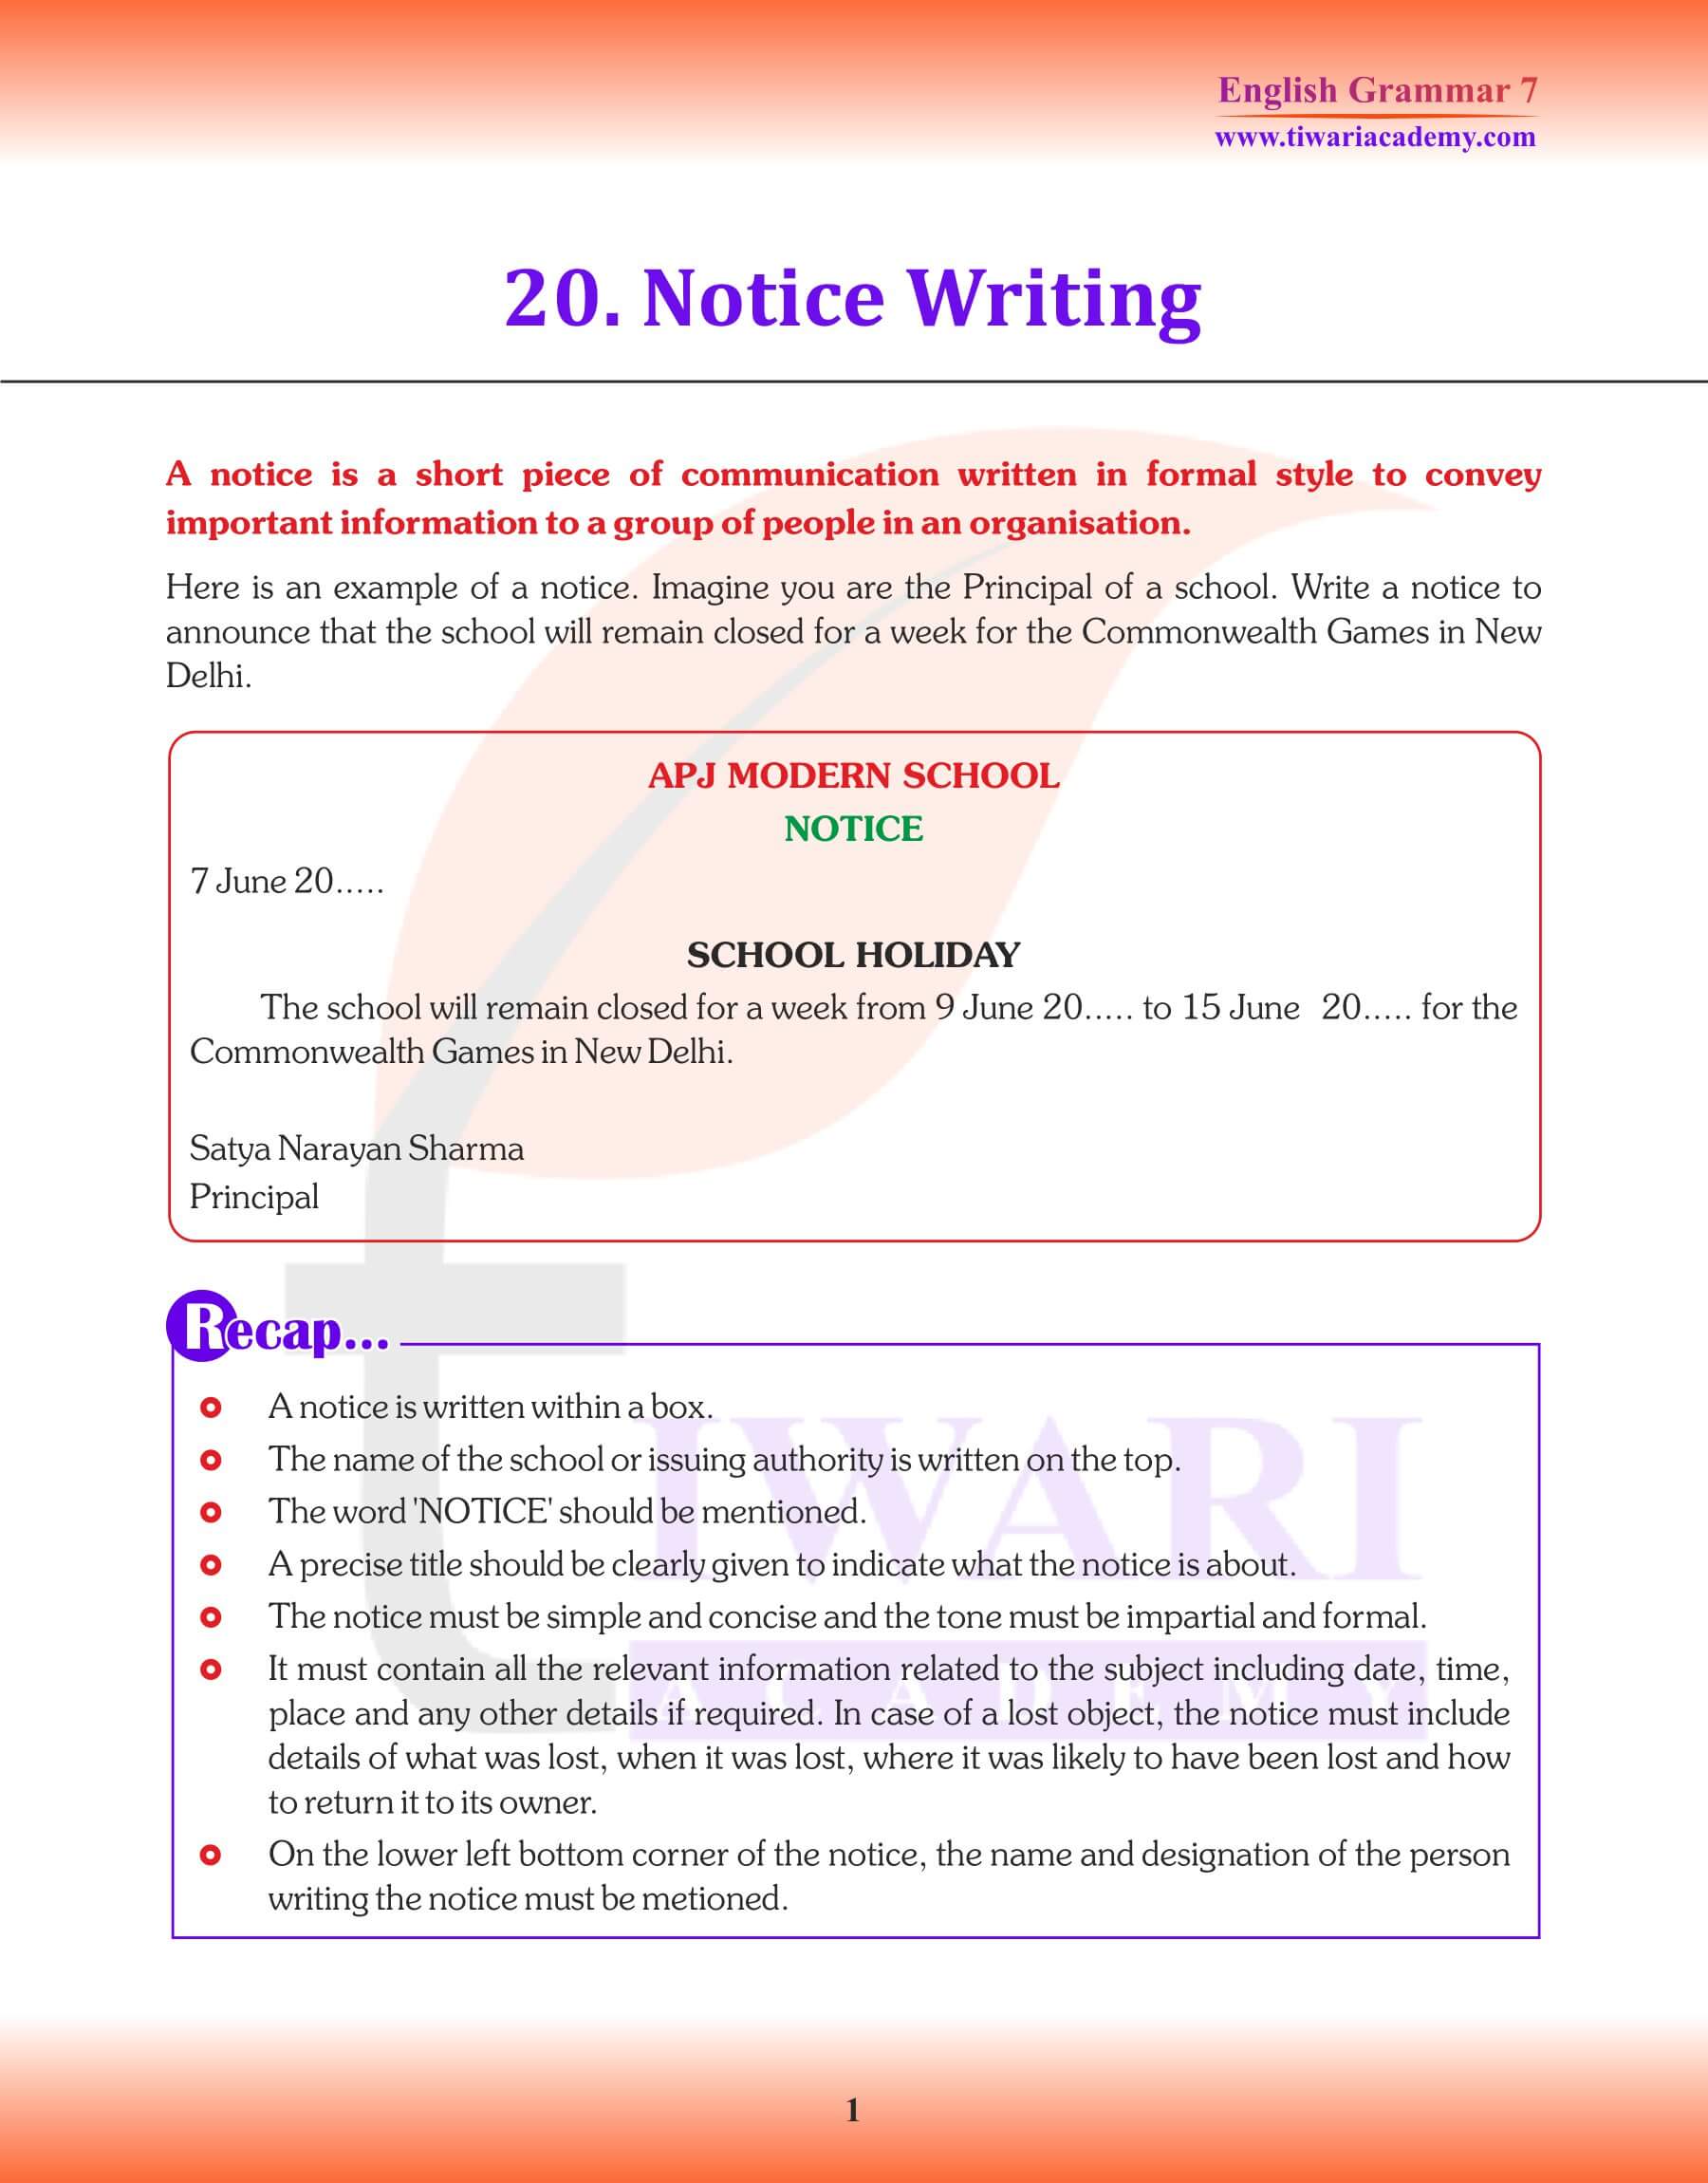 Class 7 English Grammar Chapter 20 Revision Book Notice Writing